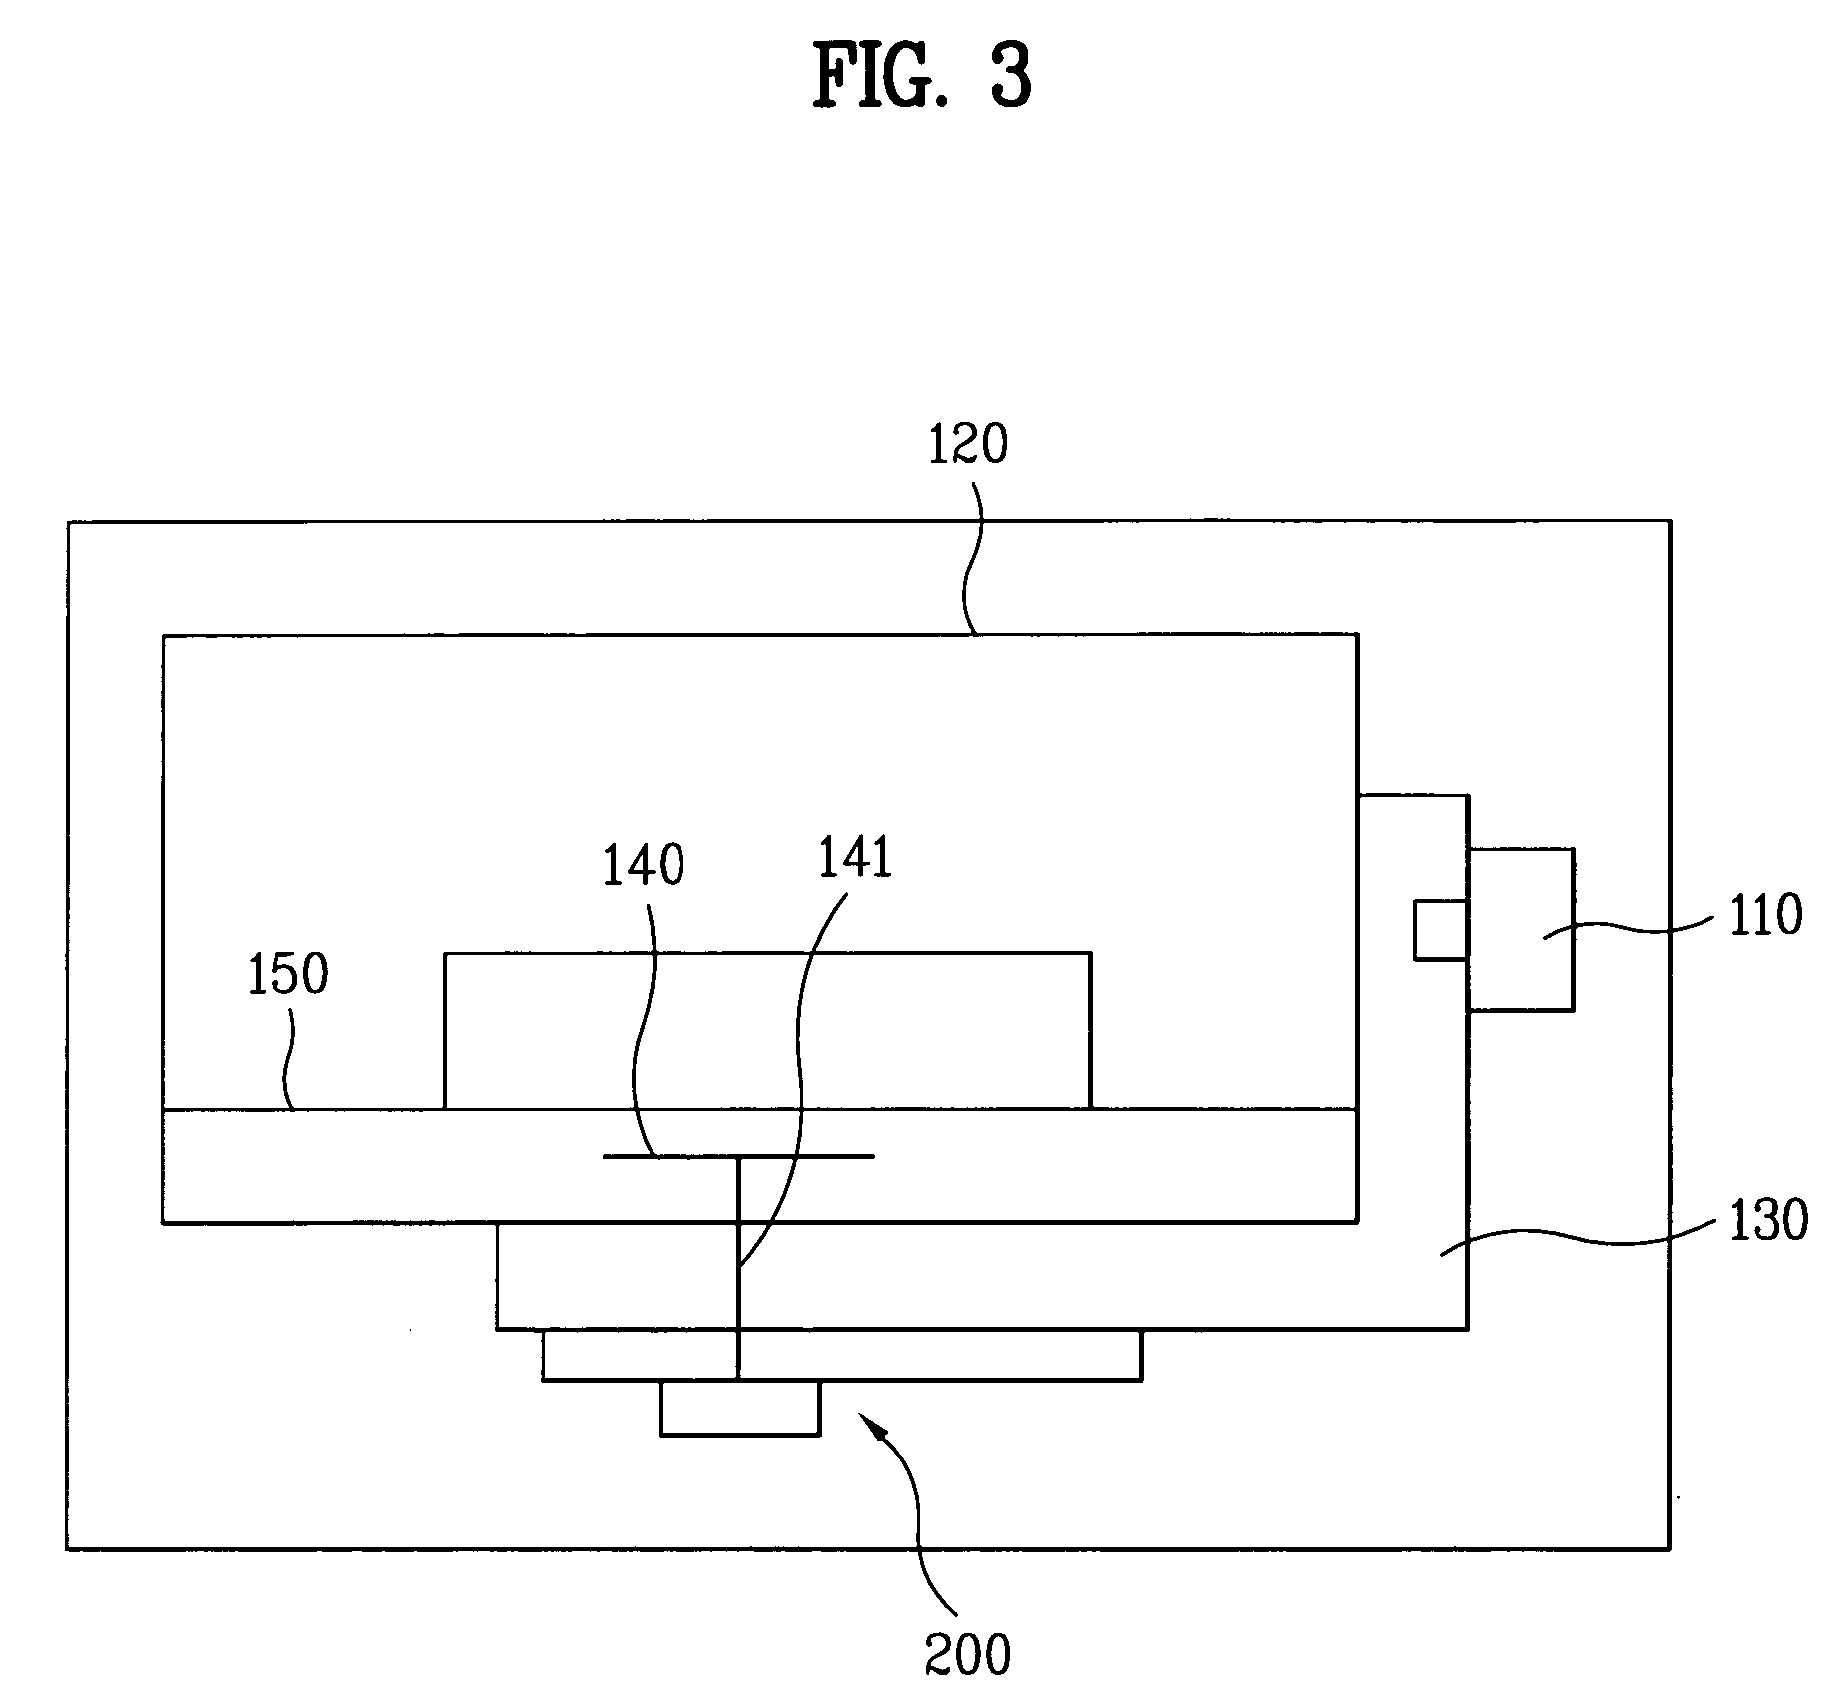 Microwave oven having a driving unit for moving and rotating an antenna